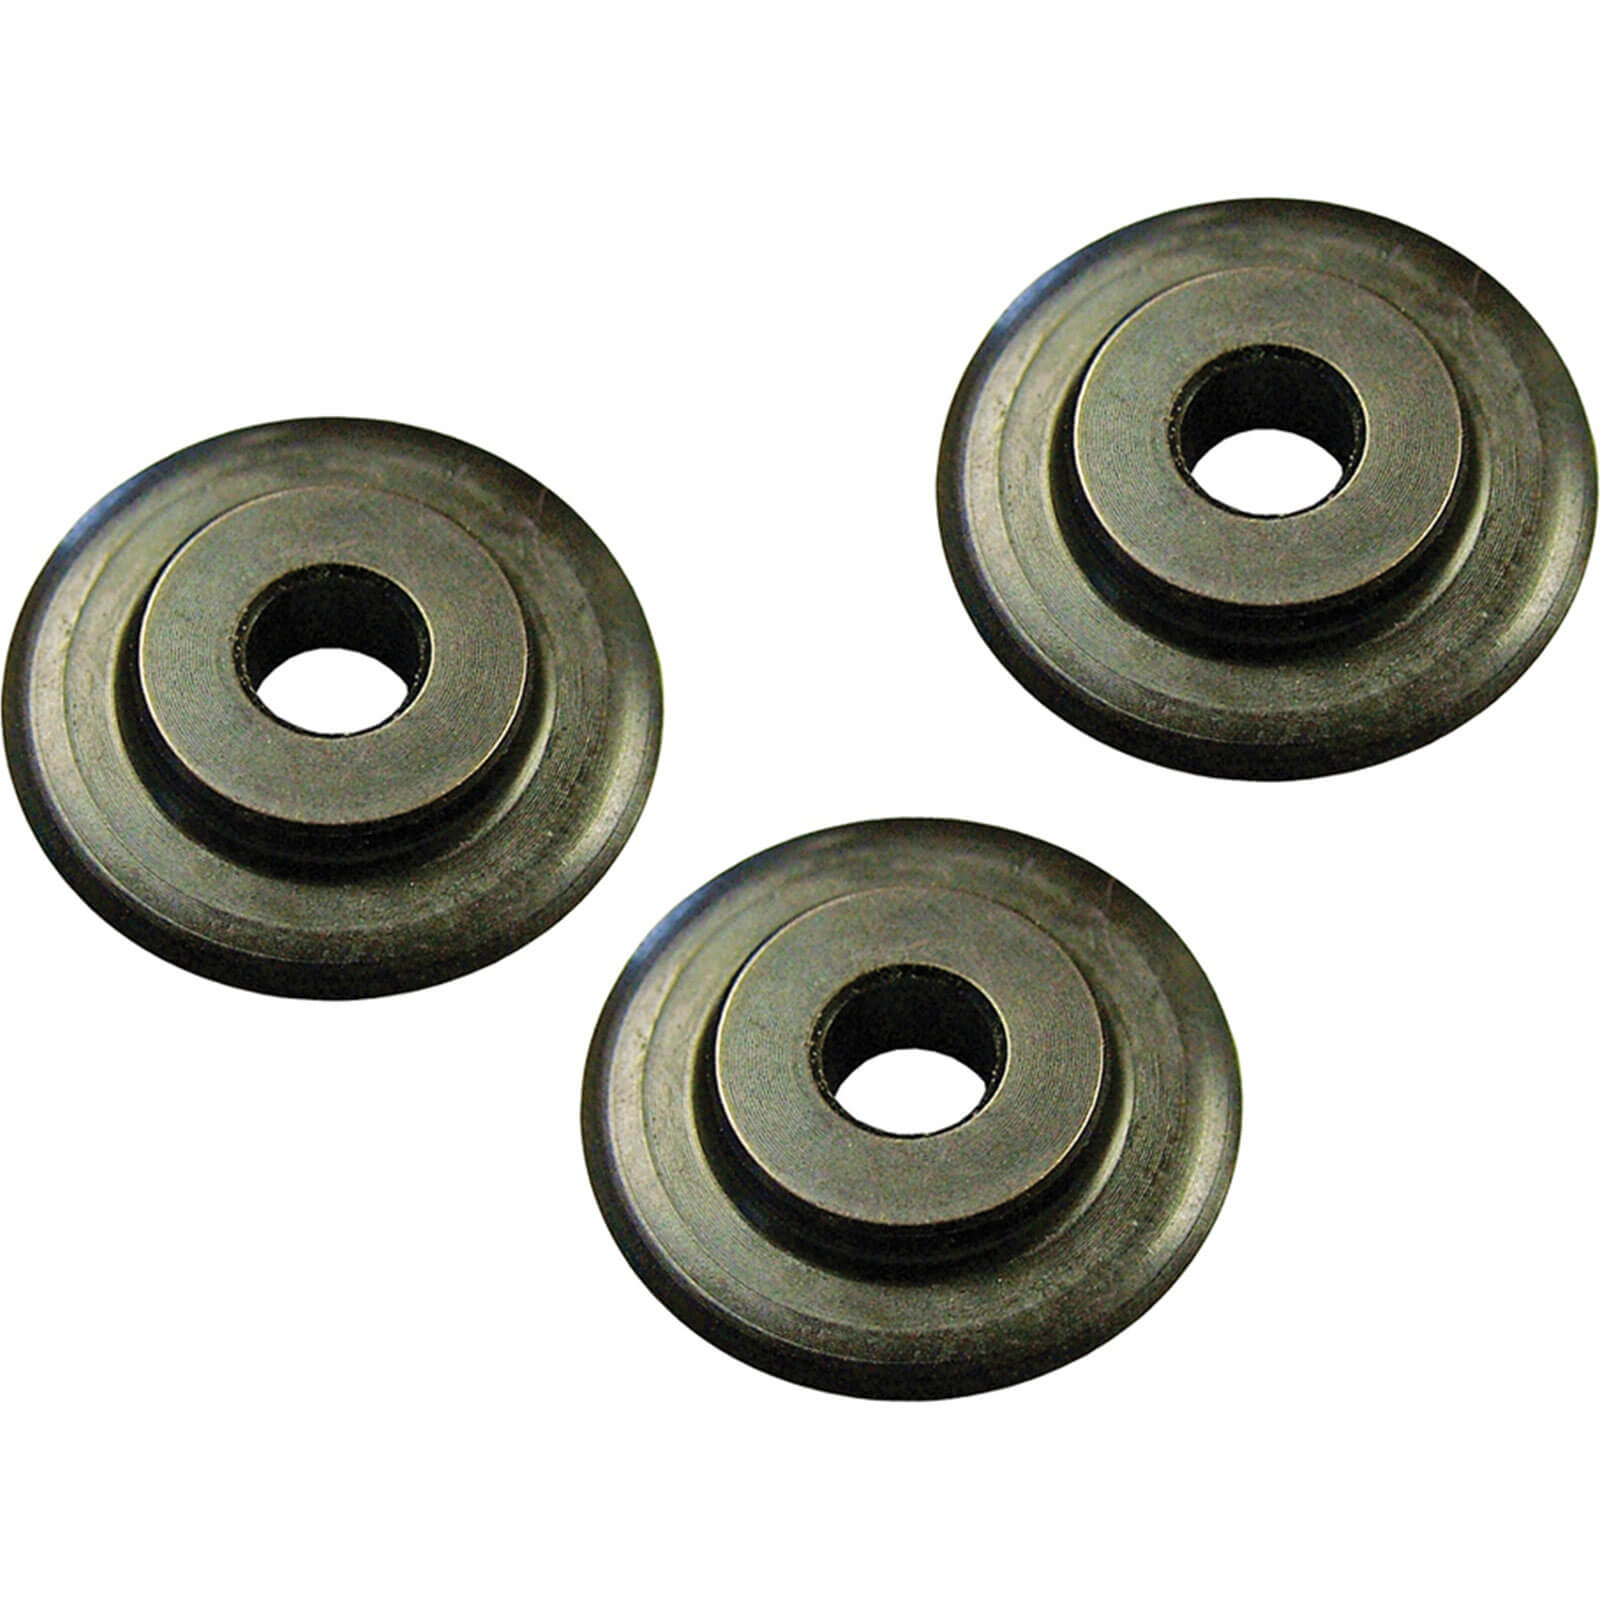 Faithfull Replacement Pipe Cutter Wheels Pack of 3